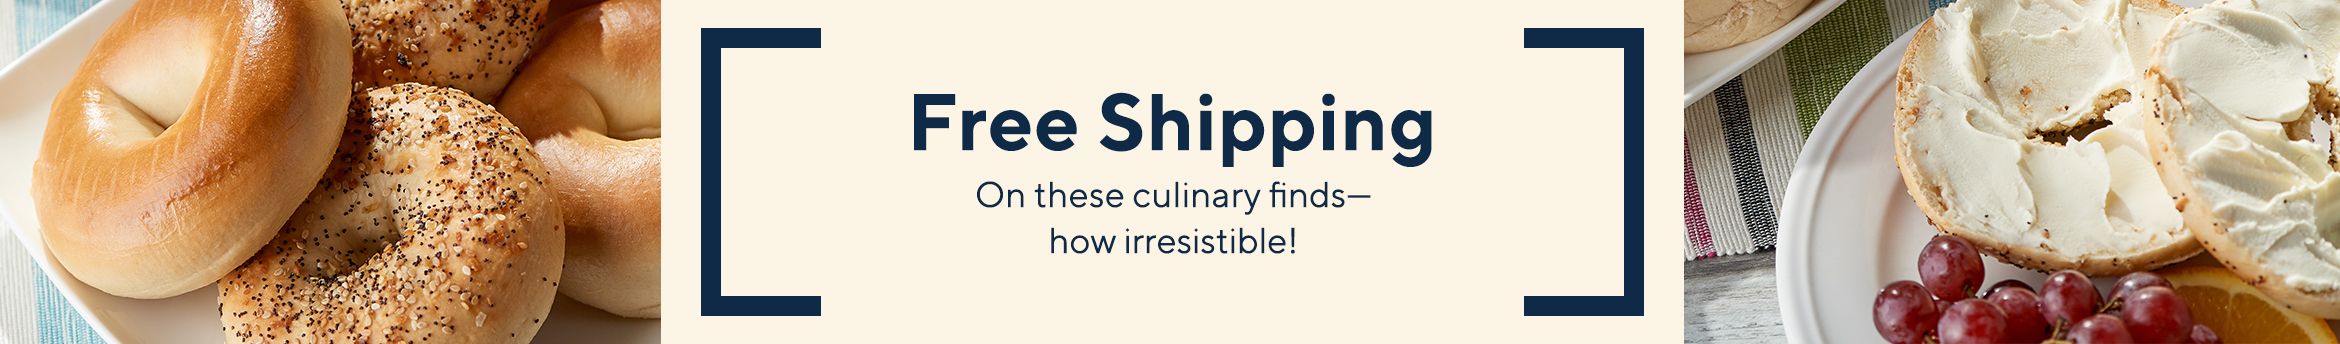 Free Shipping  On these culinary finds—how irresistible!